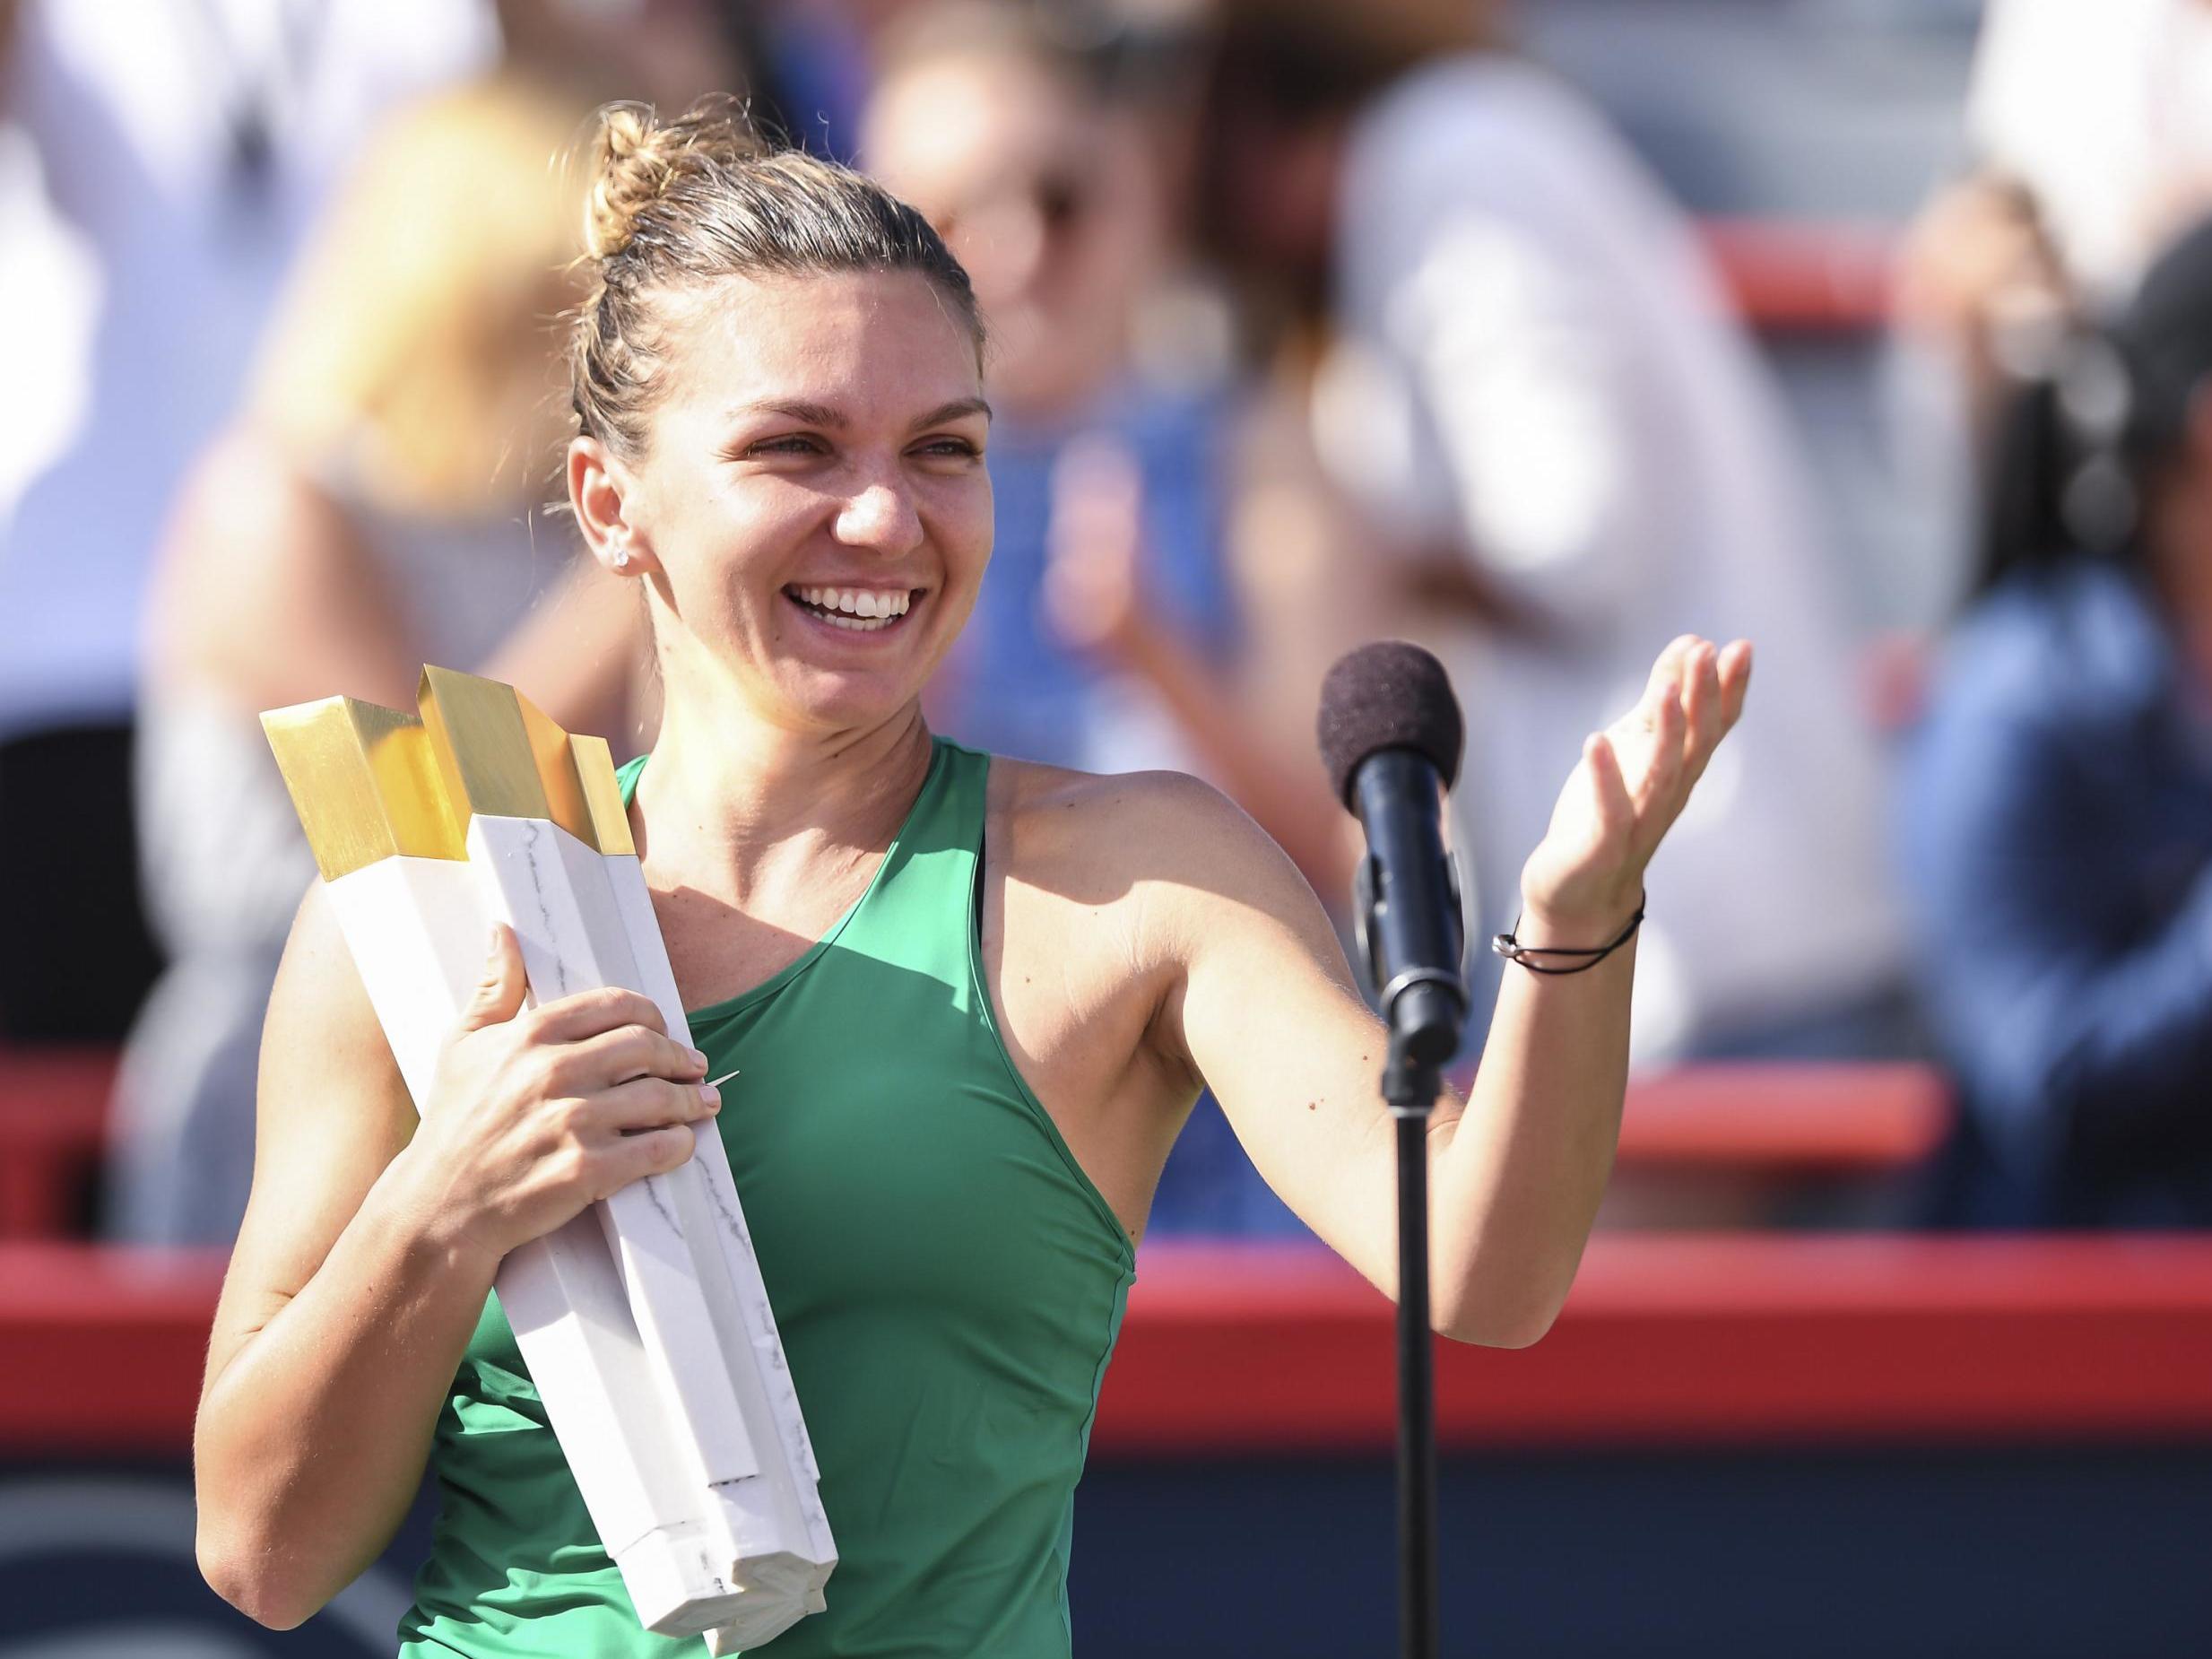 Simona Halep emerged victorious after a marathon battle lasting two hours and 41 minutes